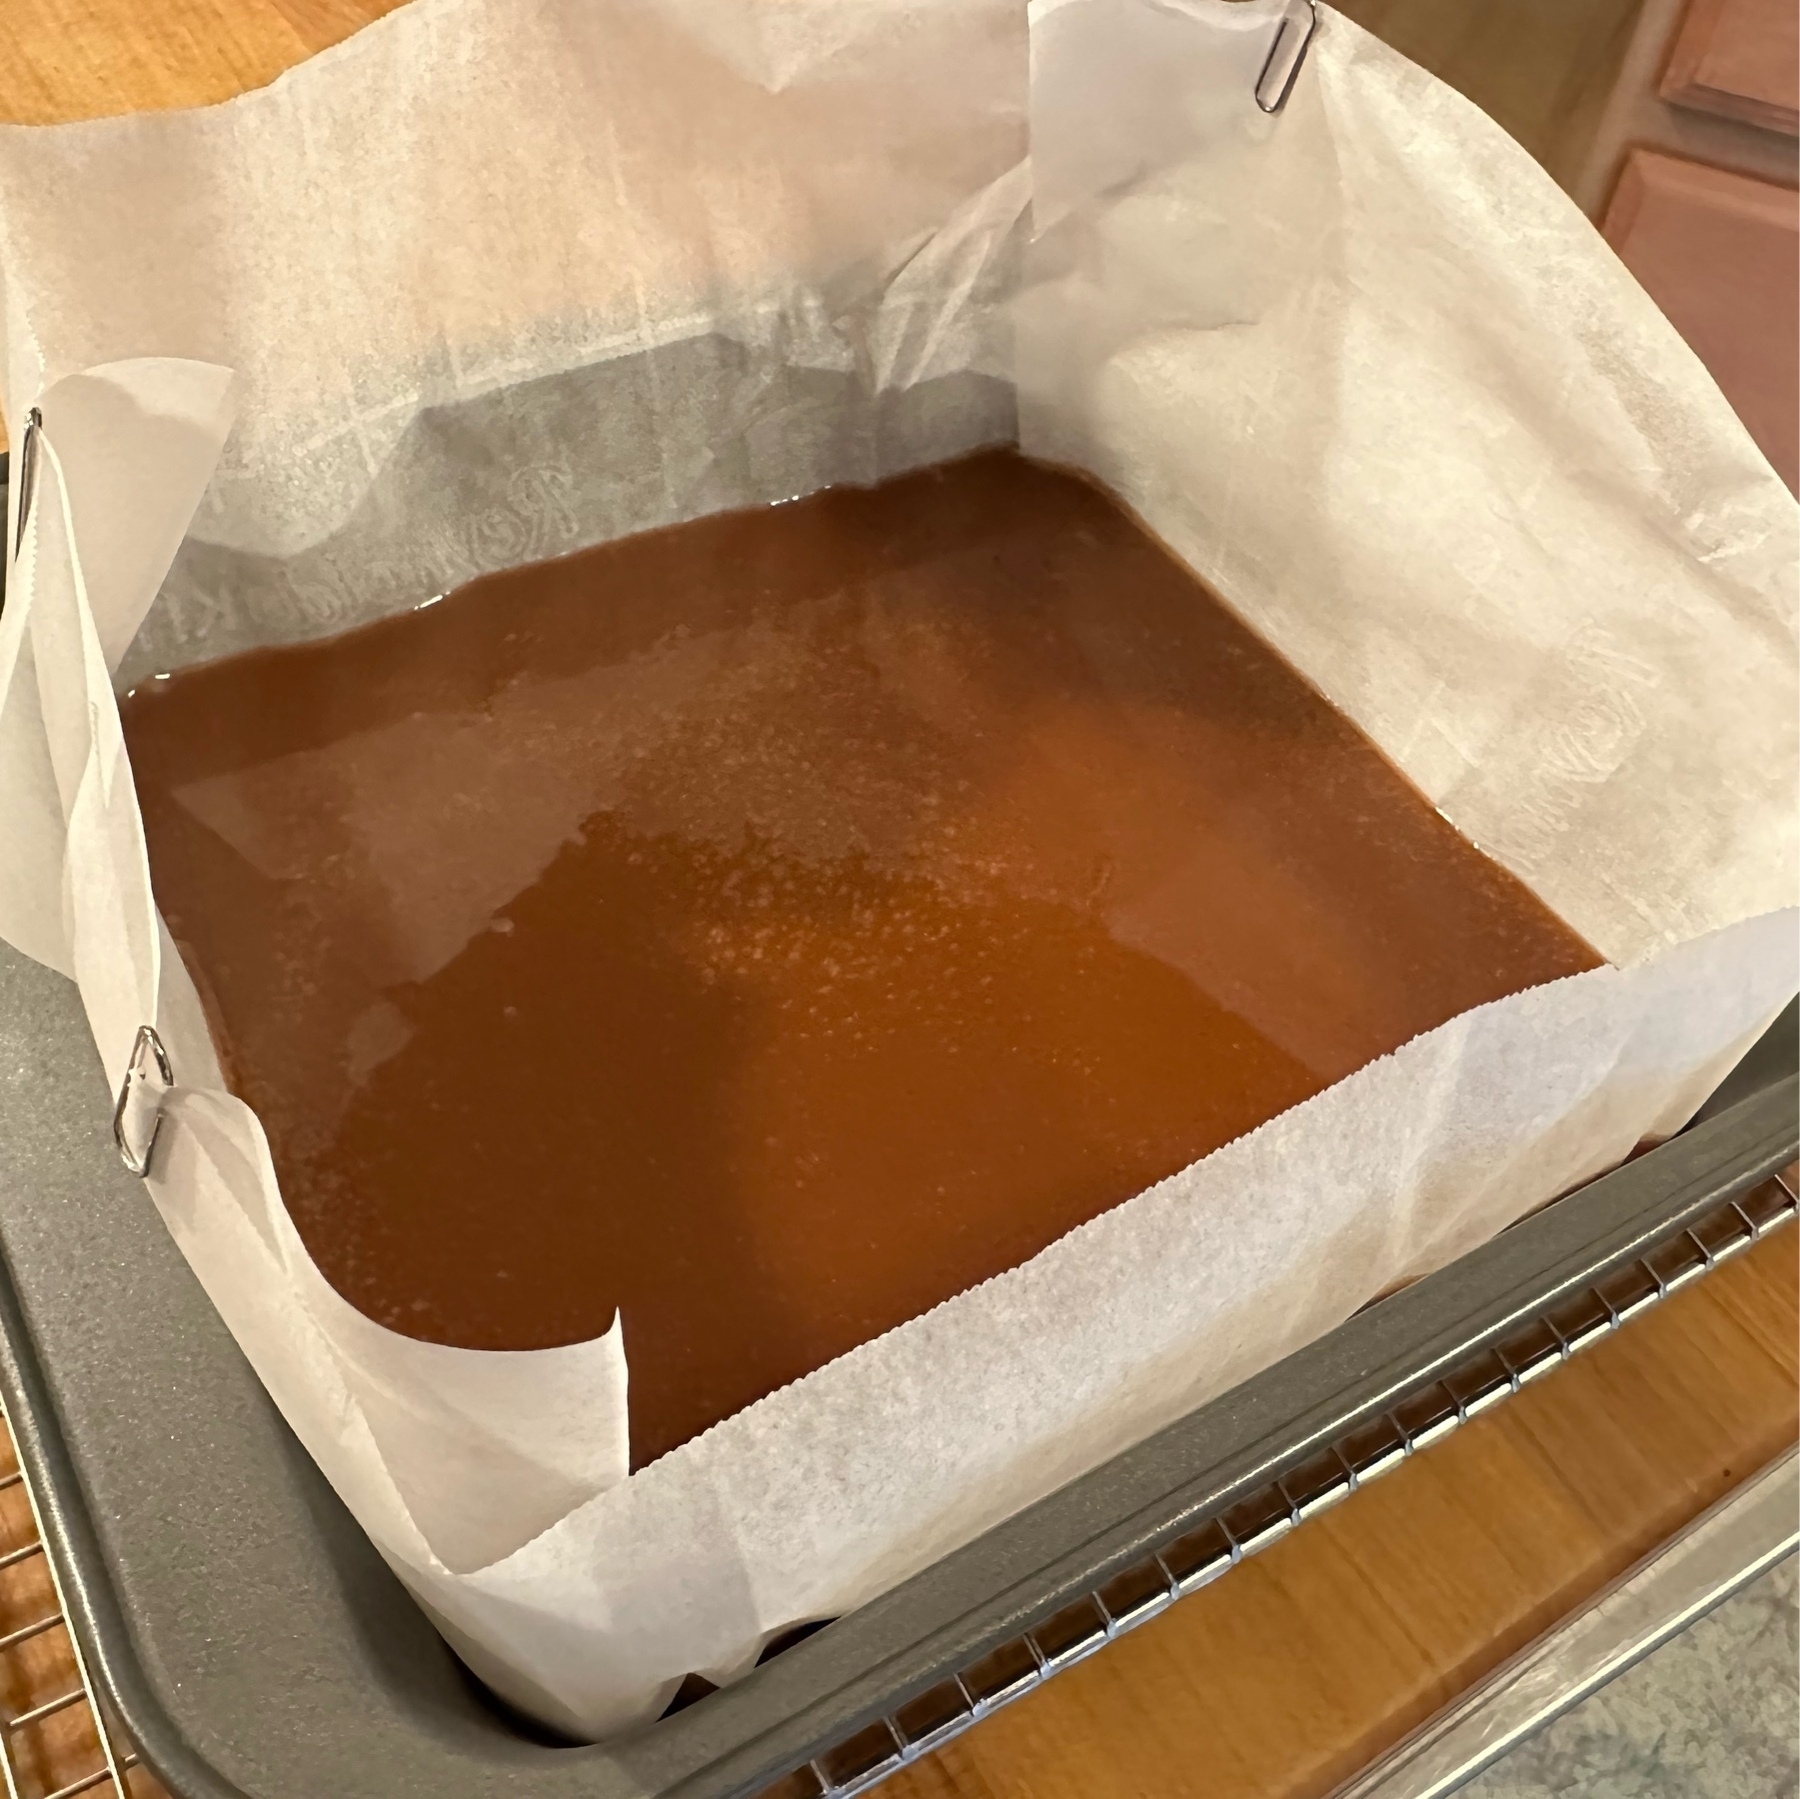 a parchment lined pan of fresh poured caramel. The pan is atop a grate and a cuttingboard.